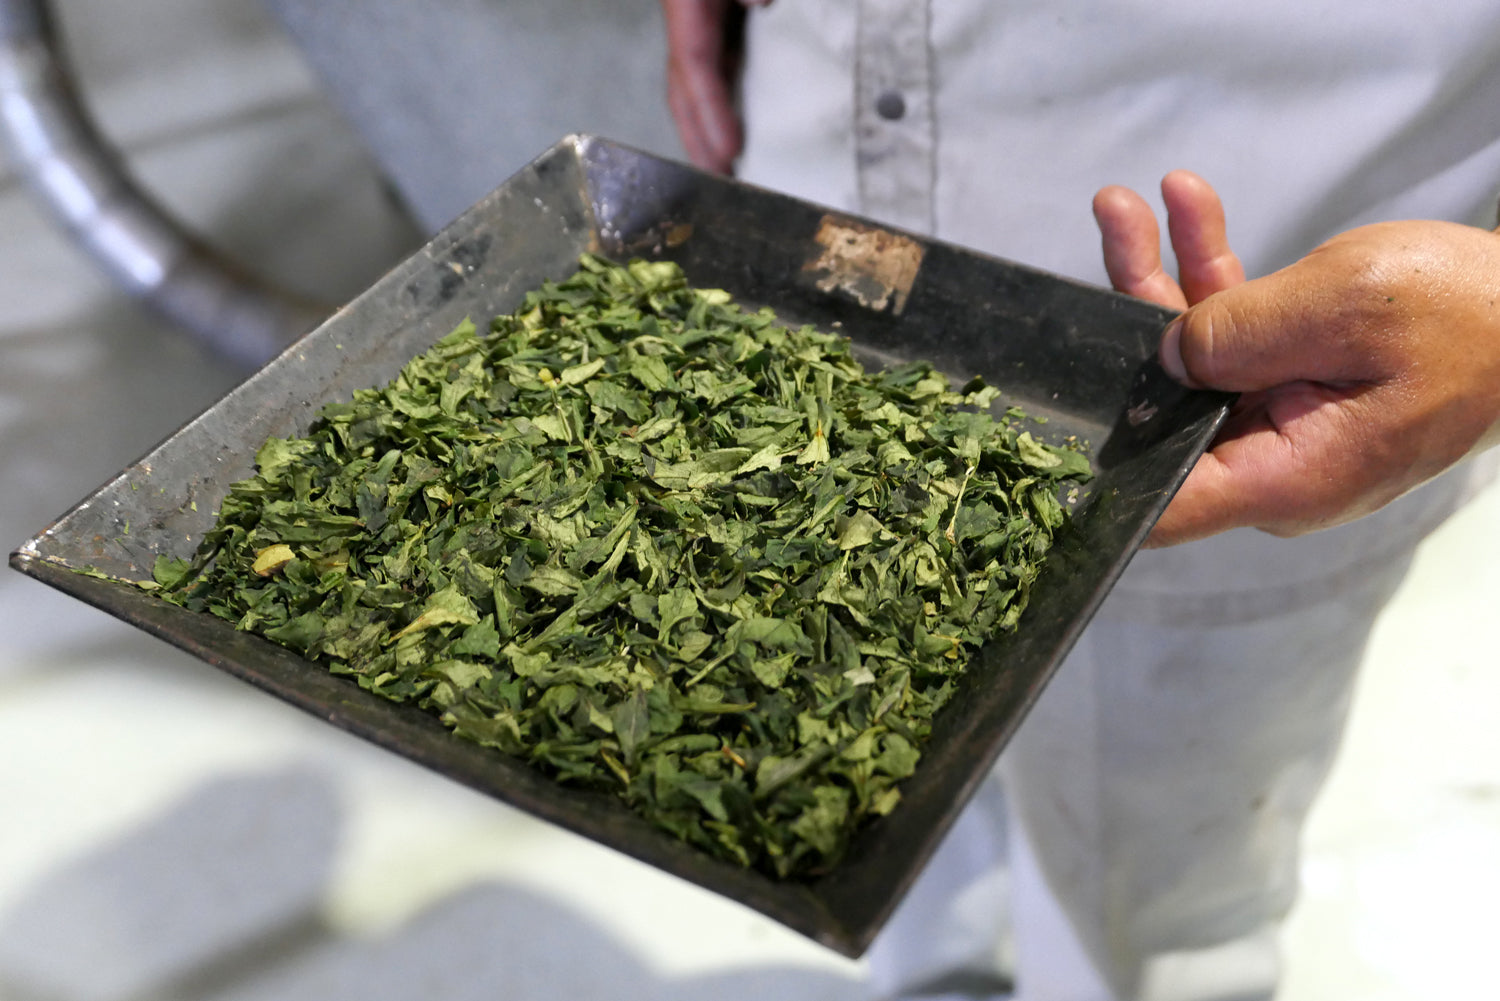 A worker shows the wet, clean matcha leaves.